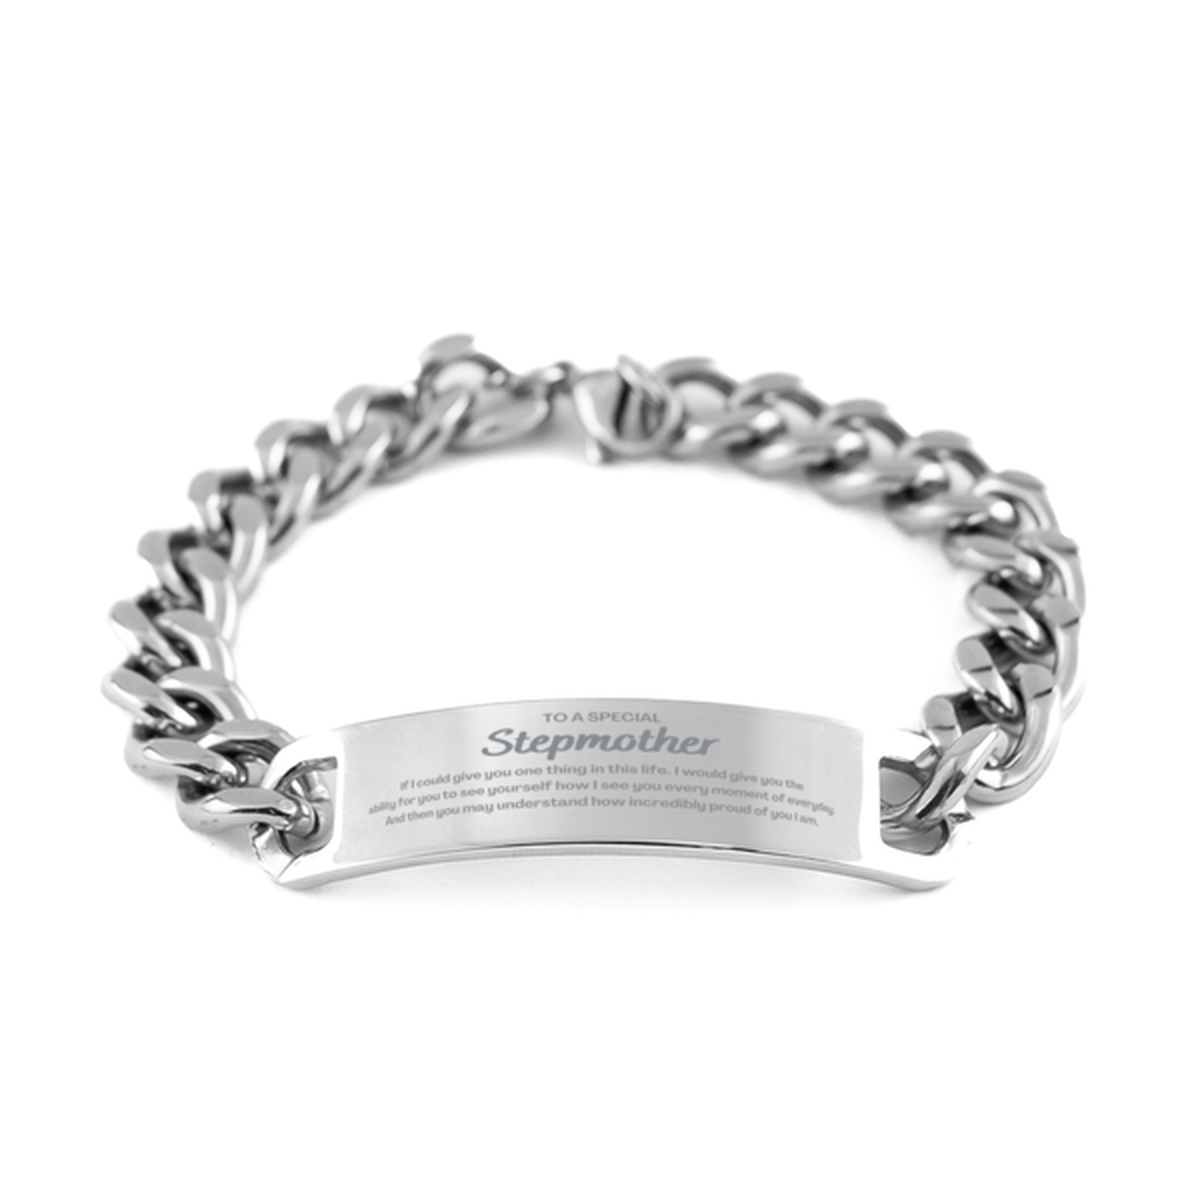 To My Stepmother Cuban Chain Stainless Steel Bracelet, Gifts For Stepmother Engraved, Inspirational Gifts for Christmas Birthday, Epic Gifts for Stepmother To A Special Stepmother how incredibly proud of you I am